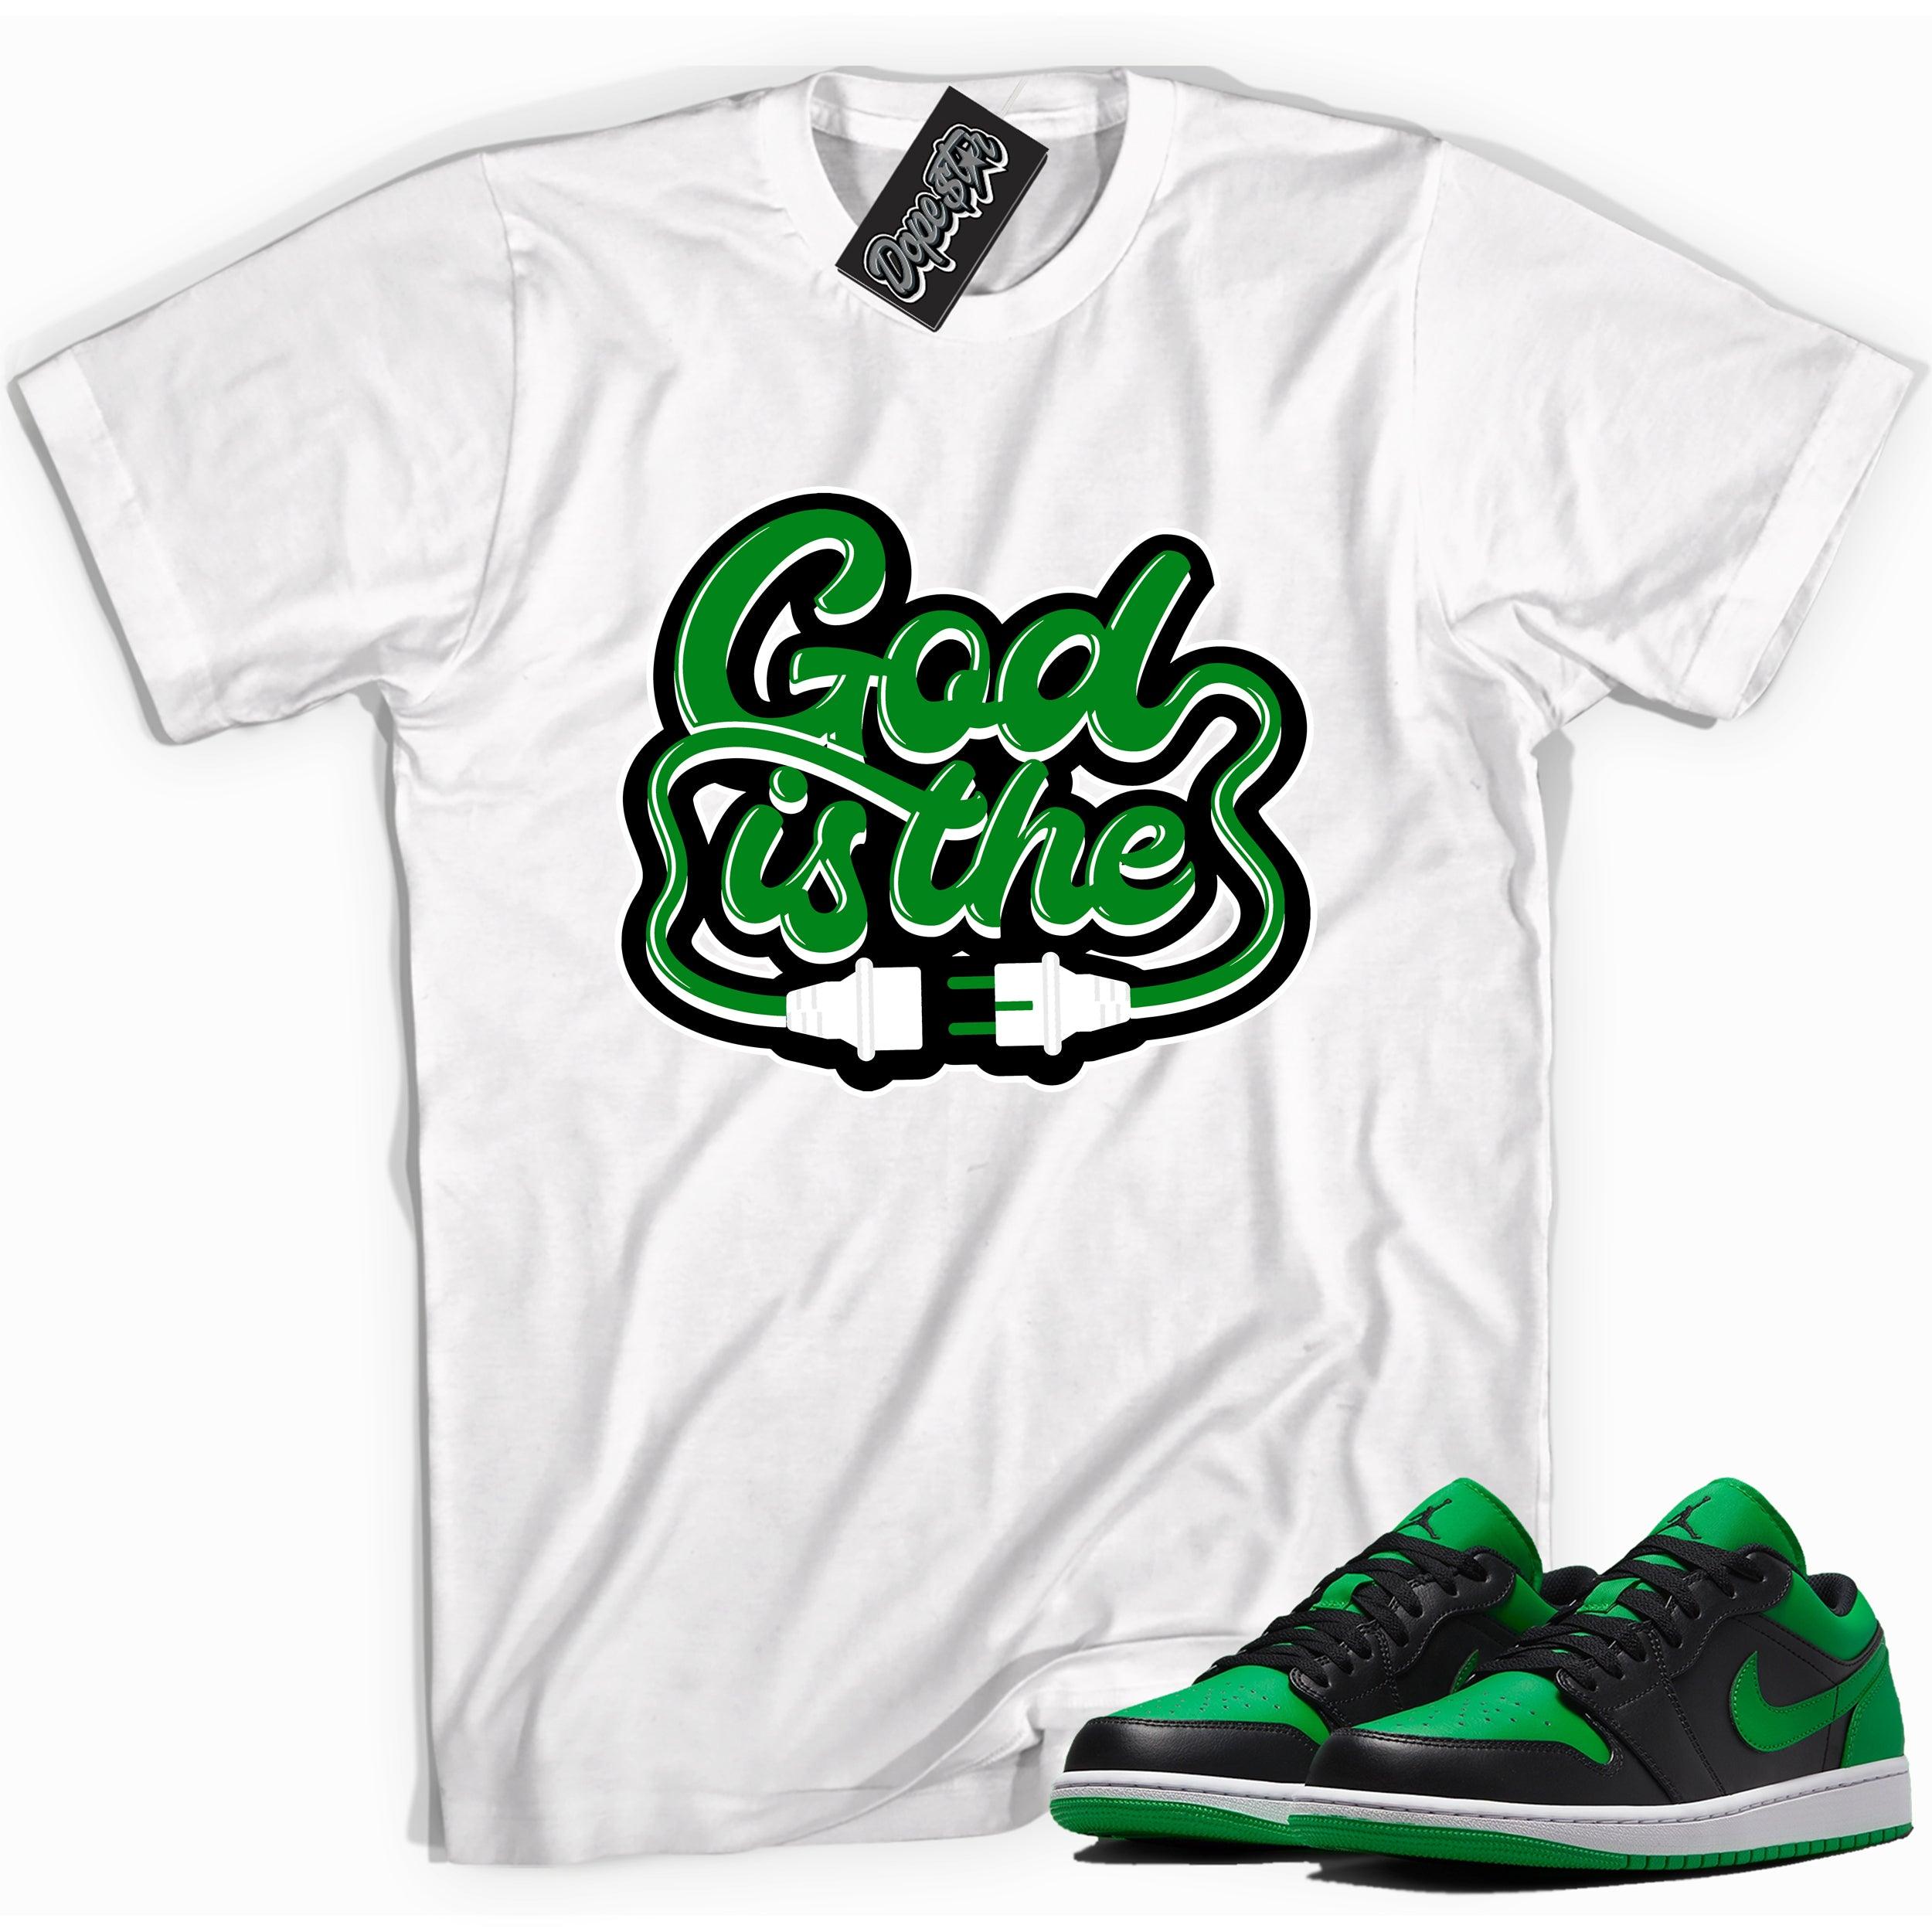 Cool white graphic tee with 'God Is The Plug' print, that perfectly matches Air Jordan 1 Low Lucky Green sneakers